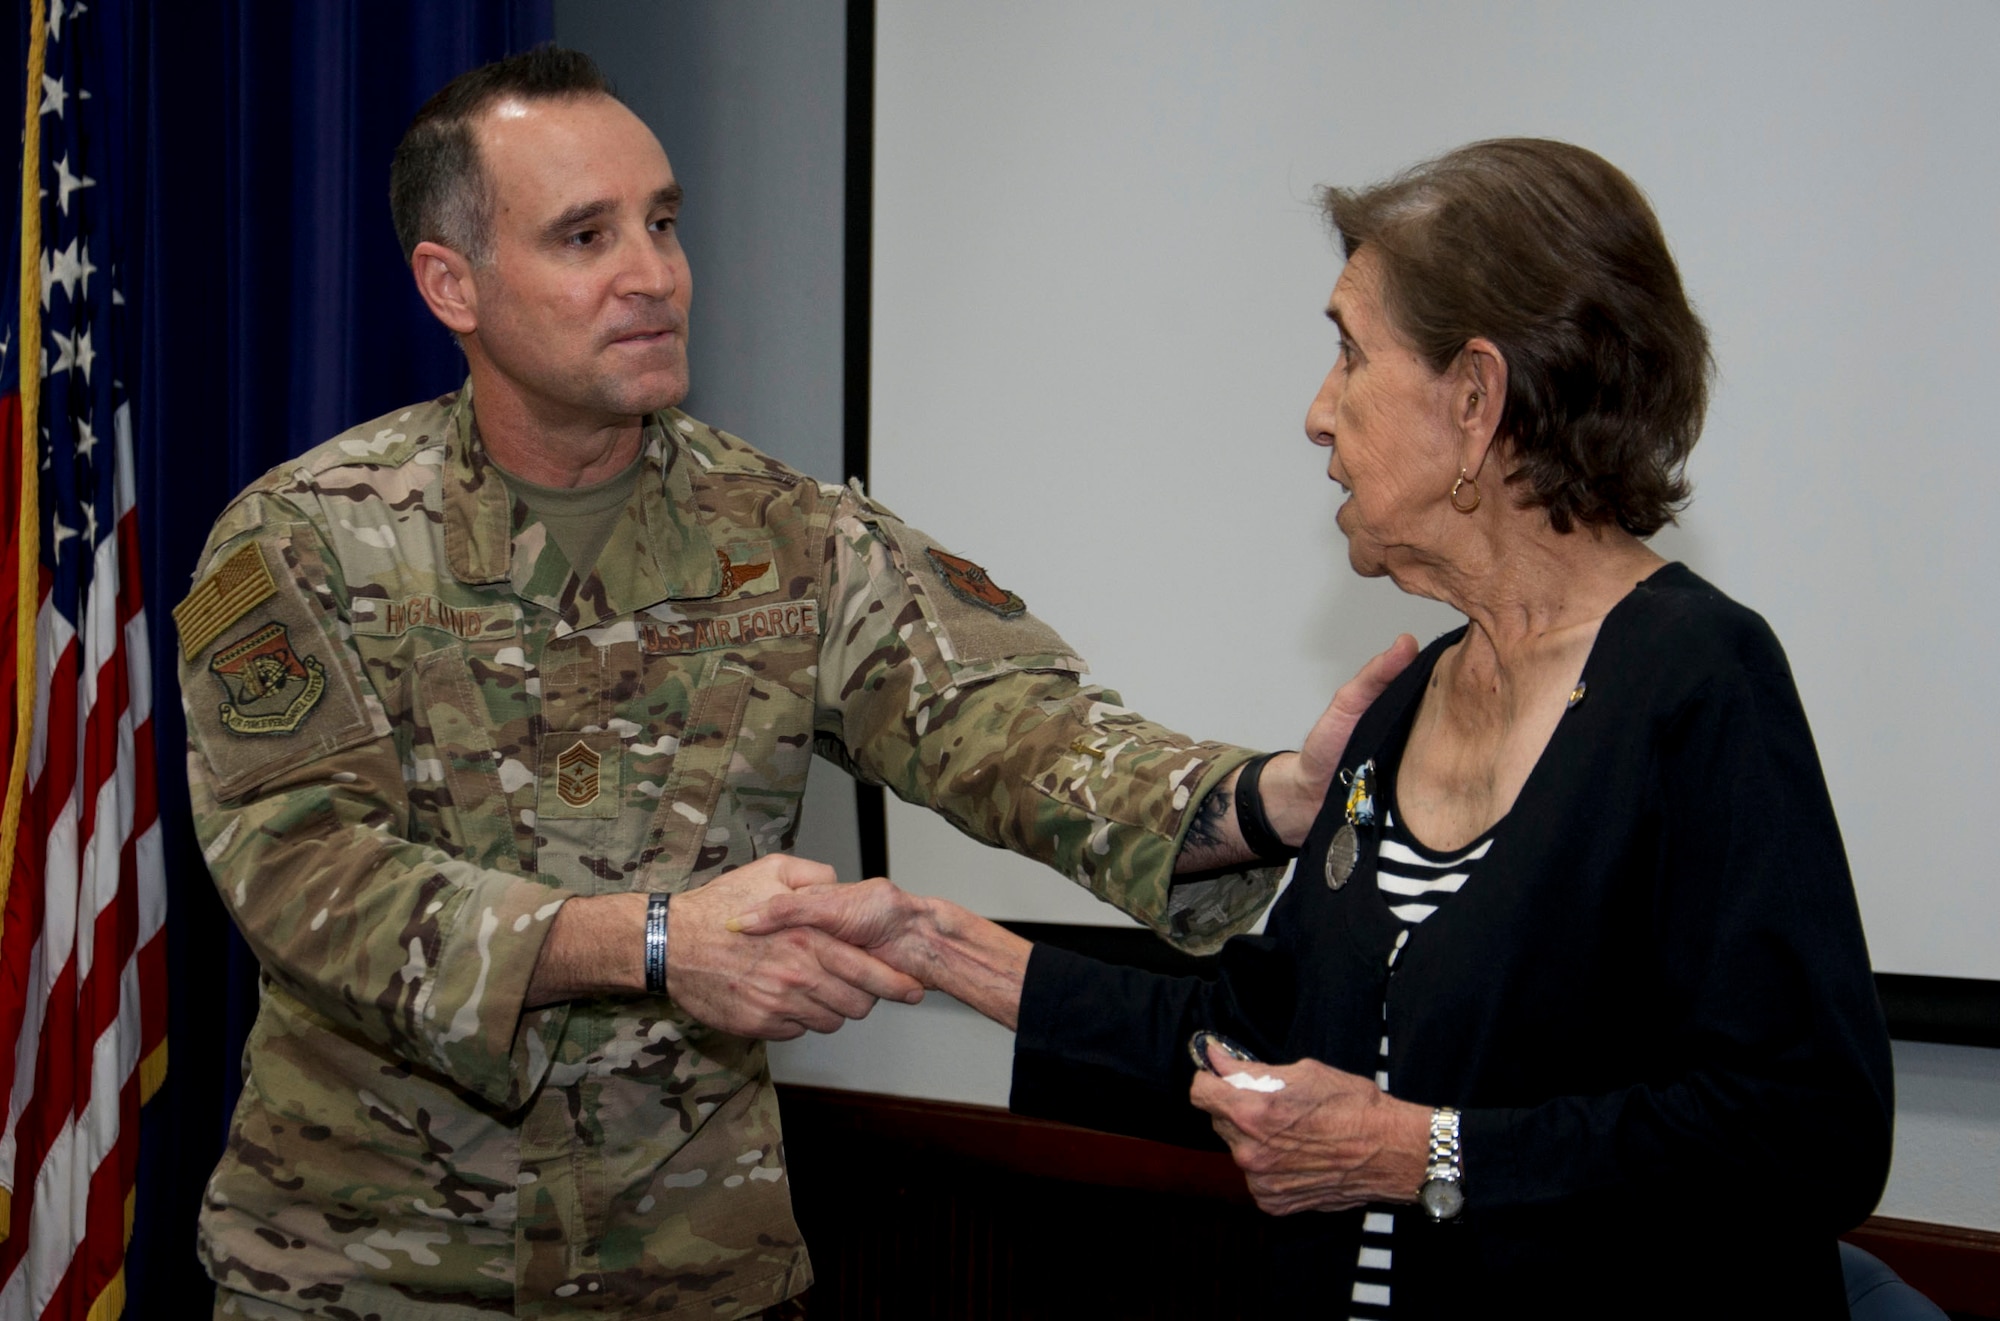 The Air Force’s Personnel Center’s command Chief Master Sgt. Daniel L. Hoglund congratulates Mary O. Price, with a handshake, following her retirement from federal service of 52 years.